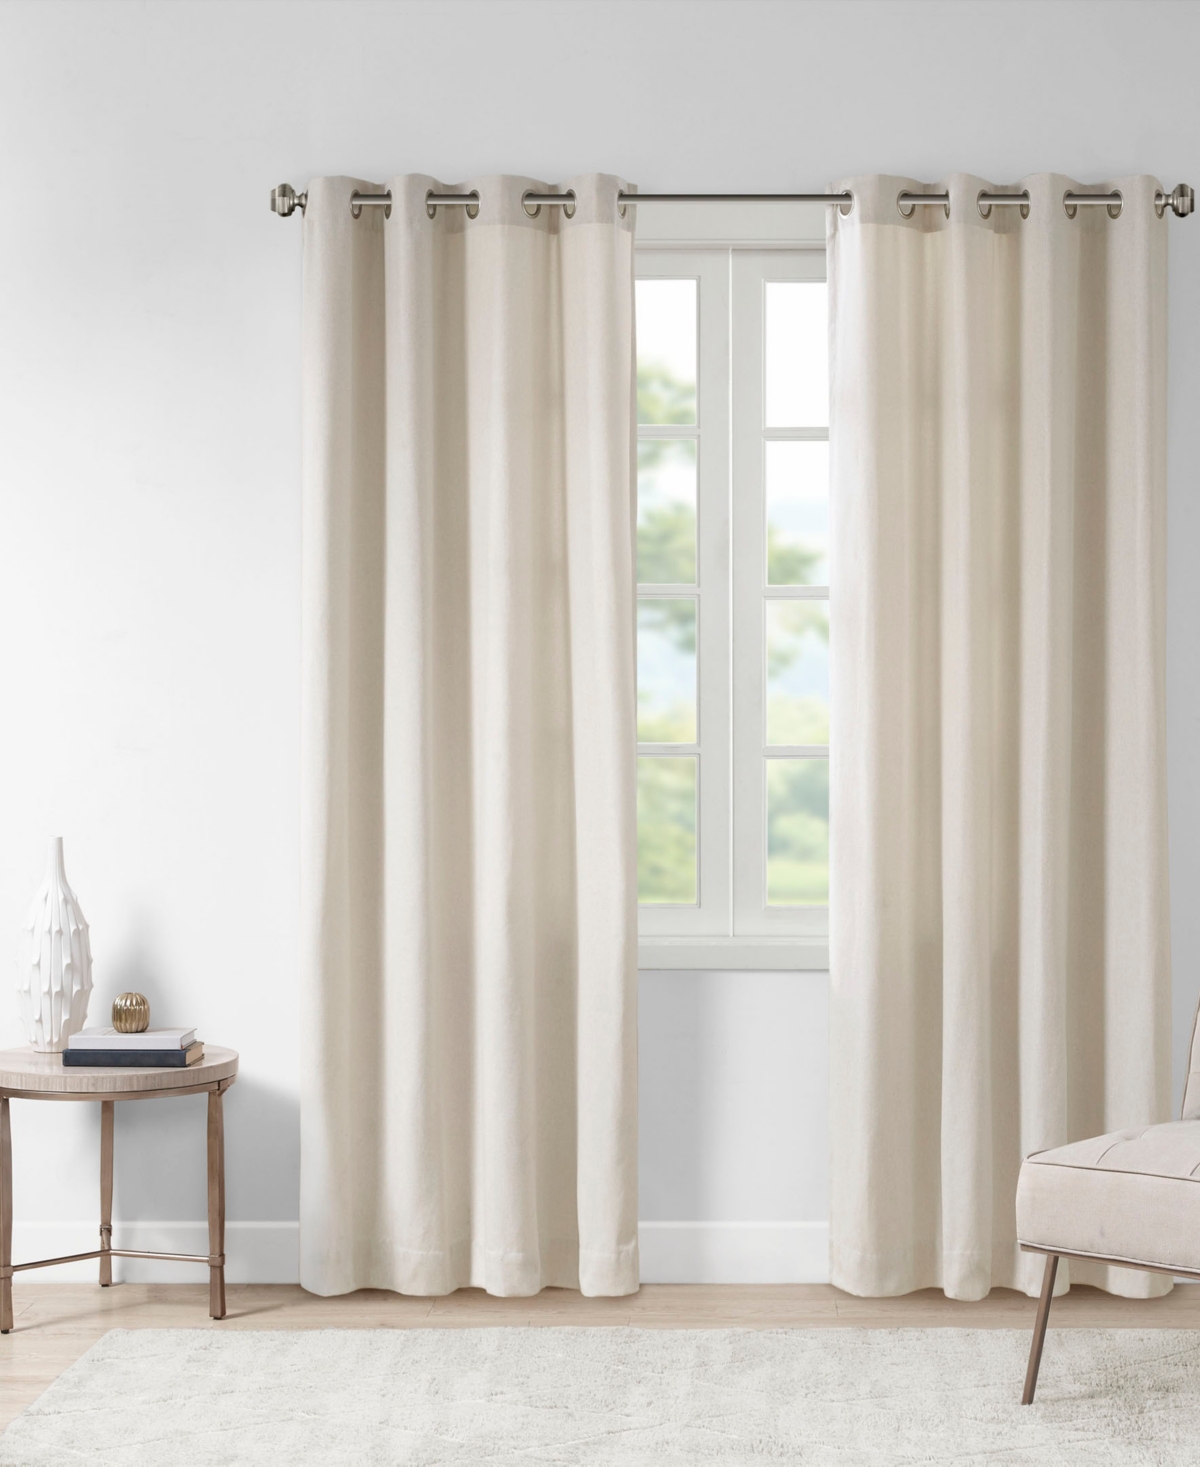 Englewood Solid Piece Dyed Grommet Top Curtain Panel, 50"W x 63"L - Natural